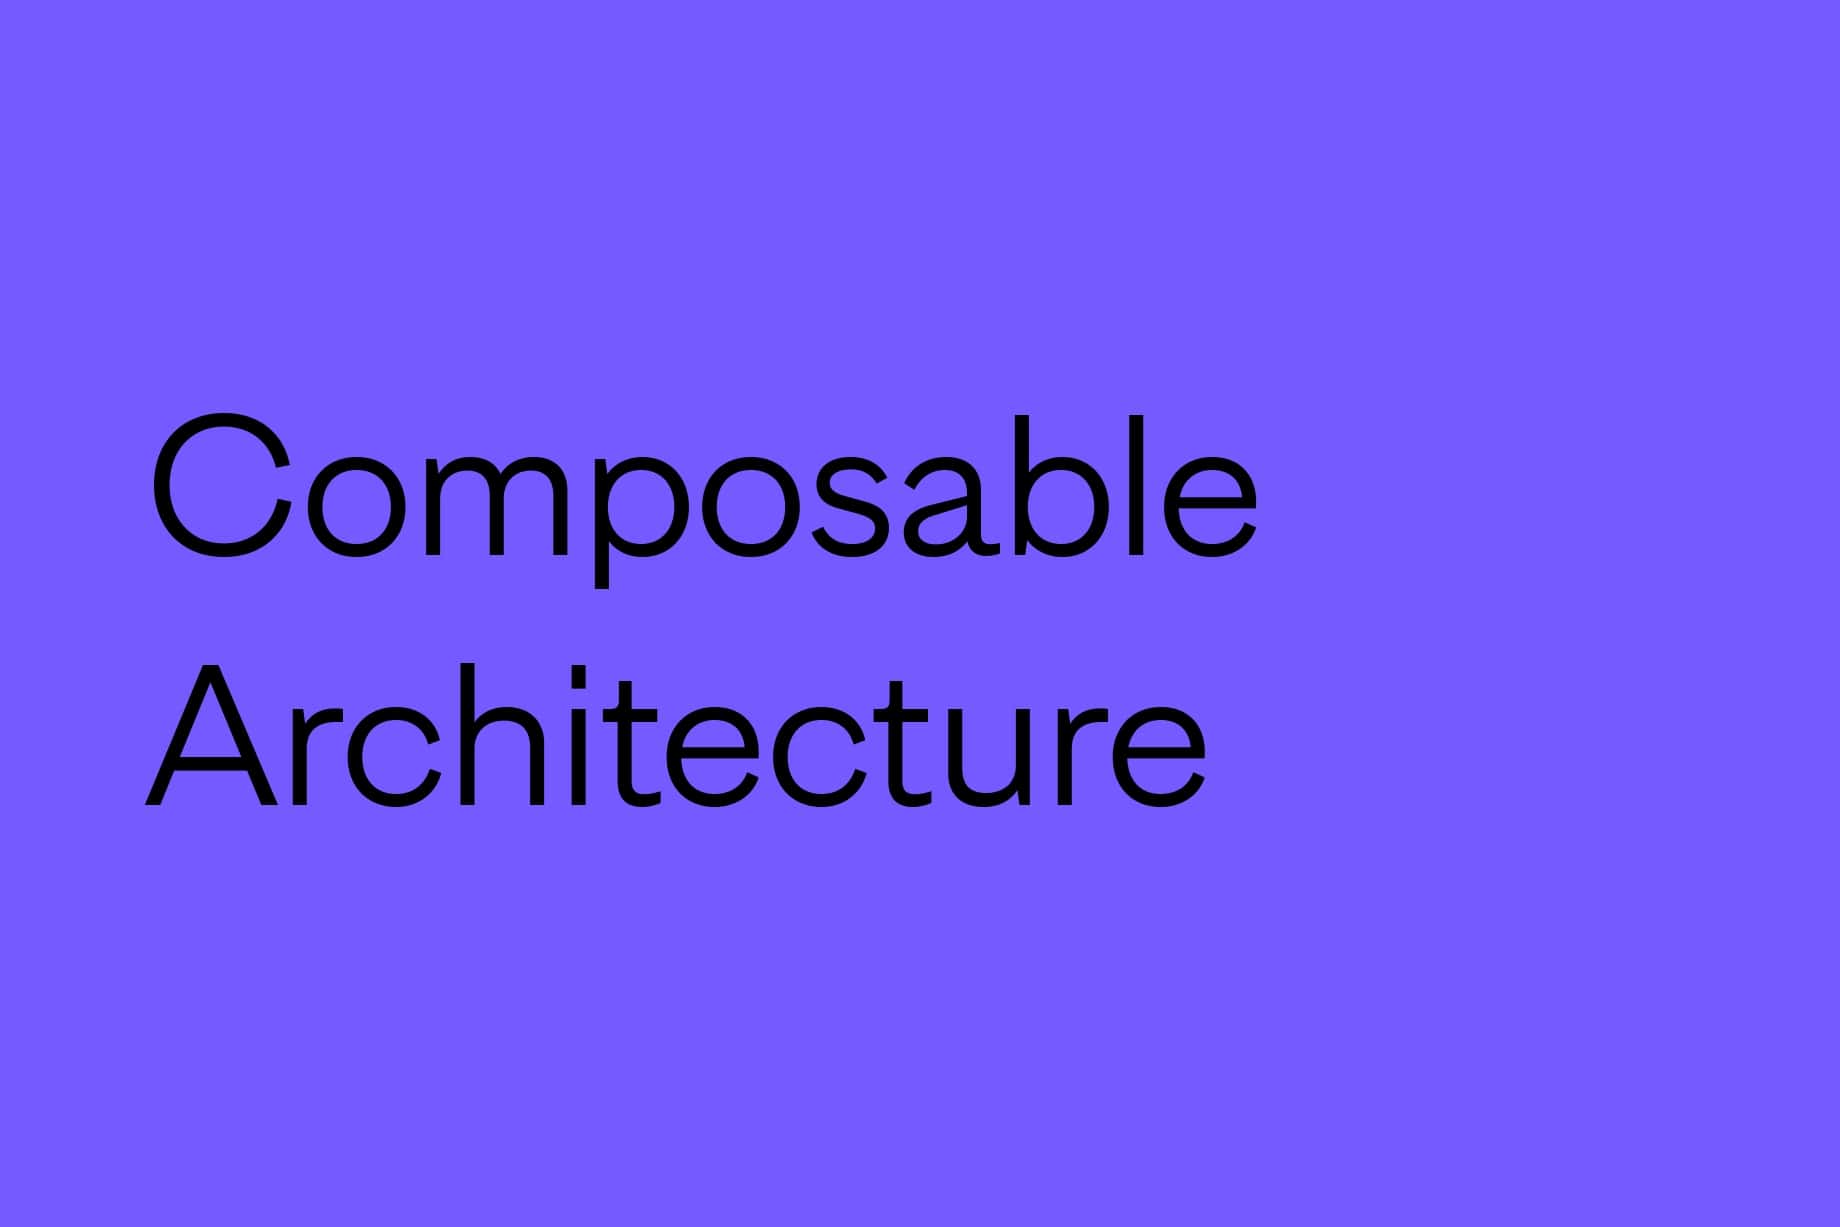 Future-Proof Your Enterprise Technology with Composable Architecture